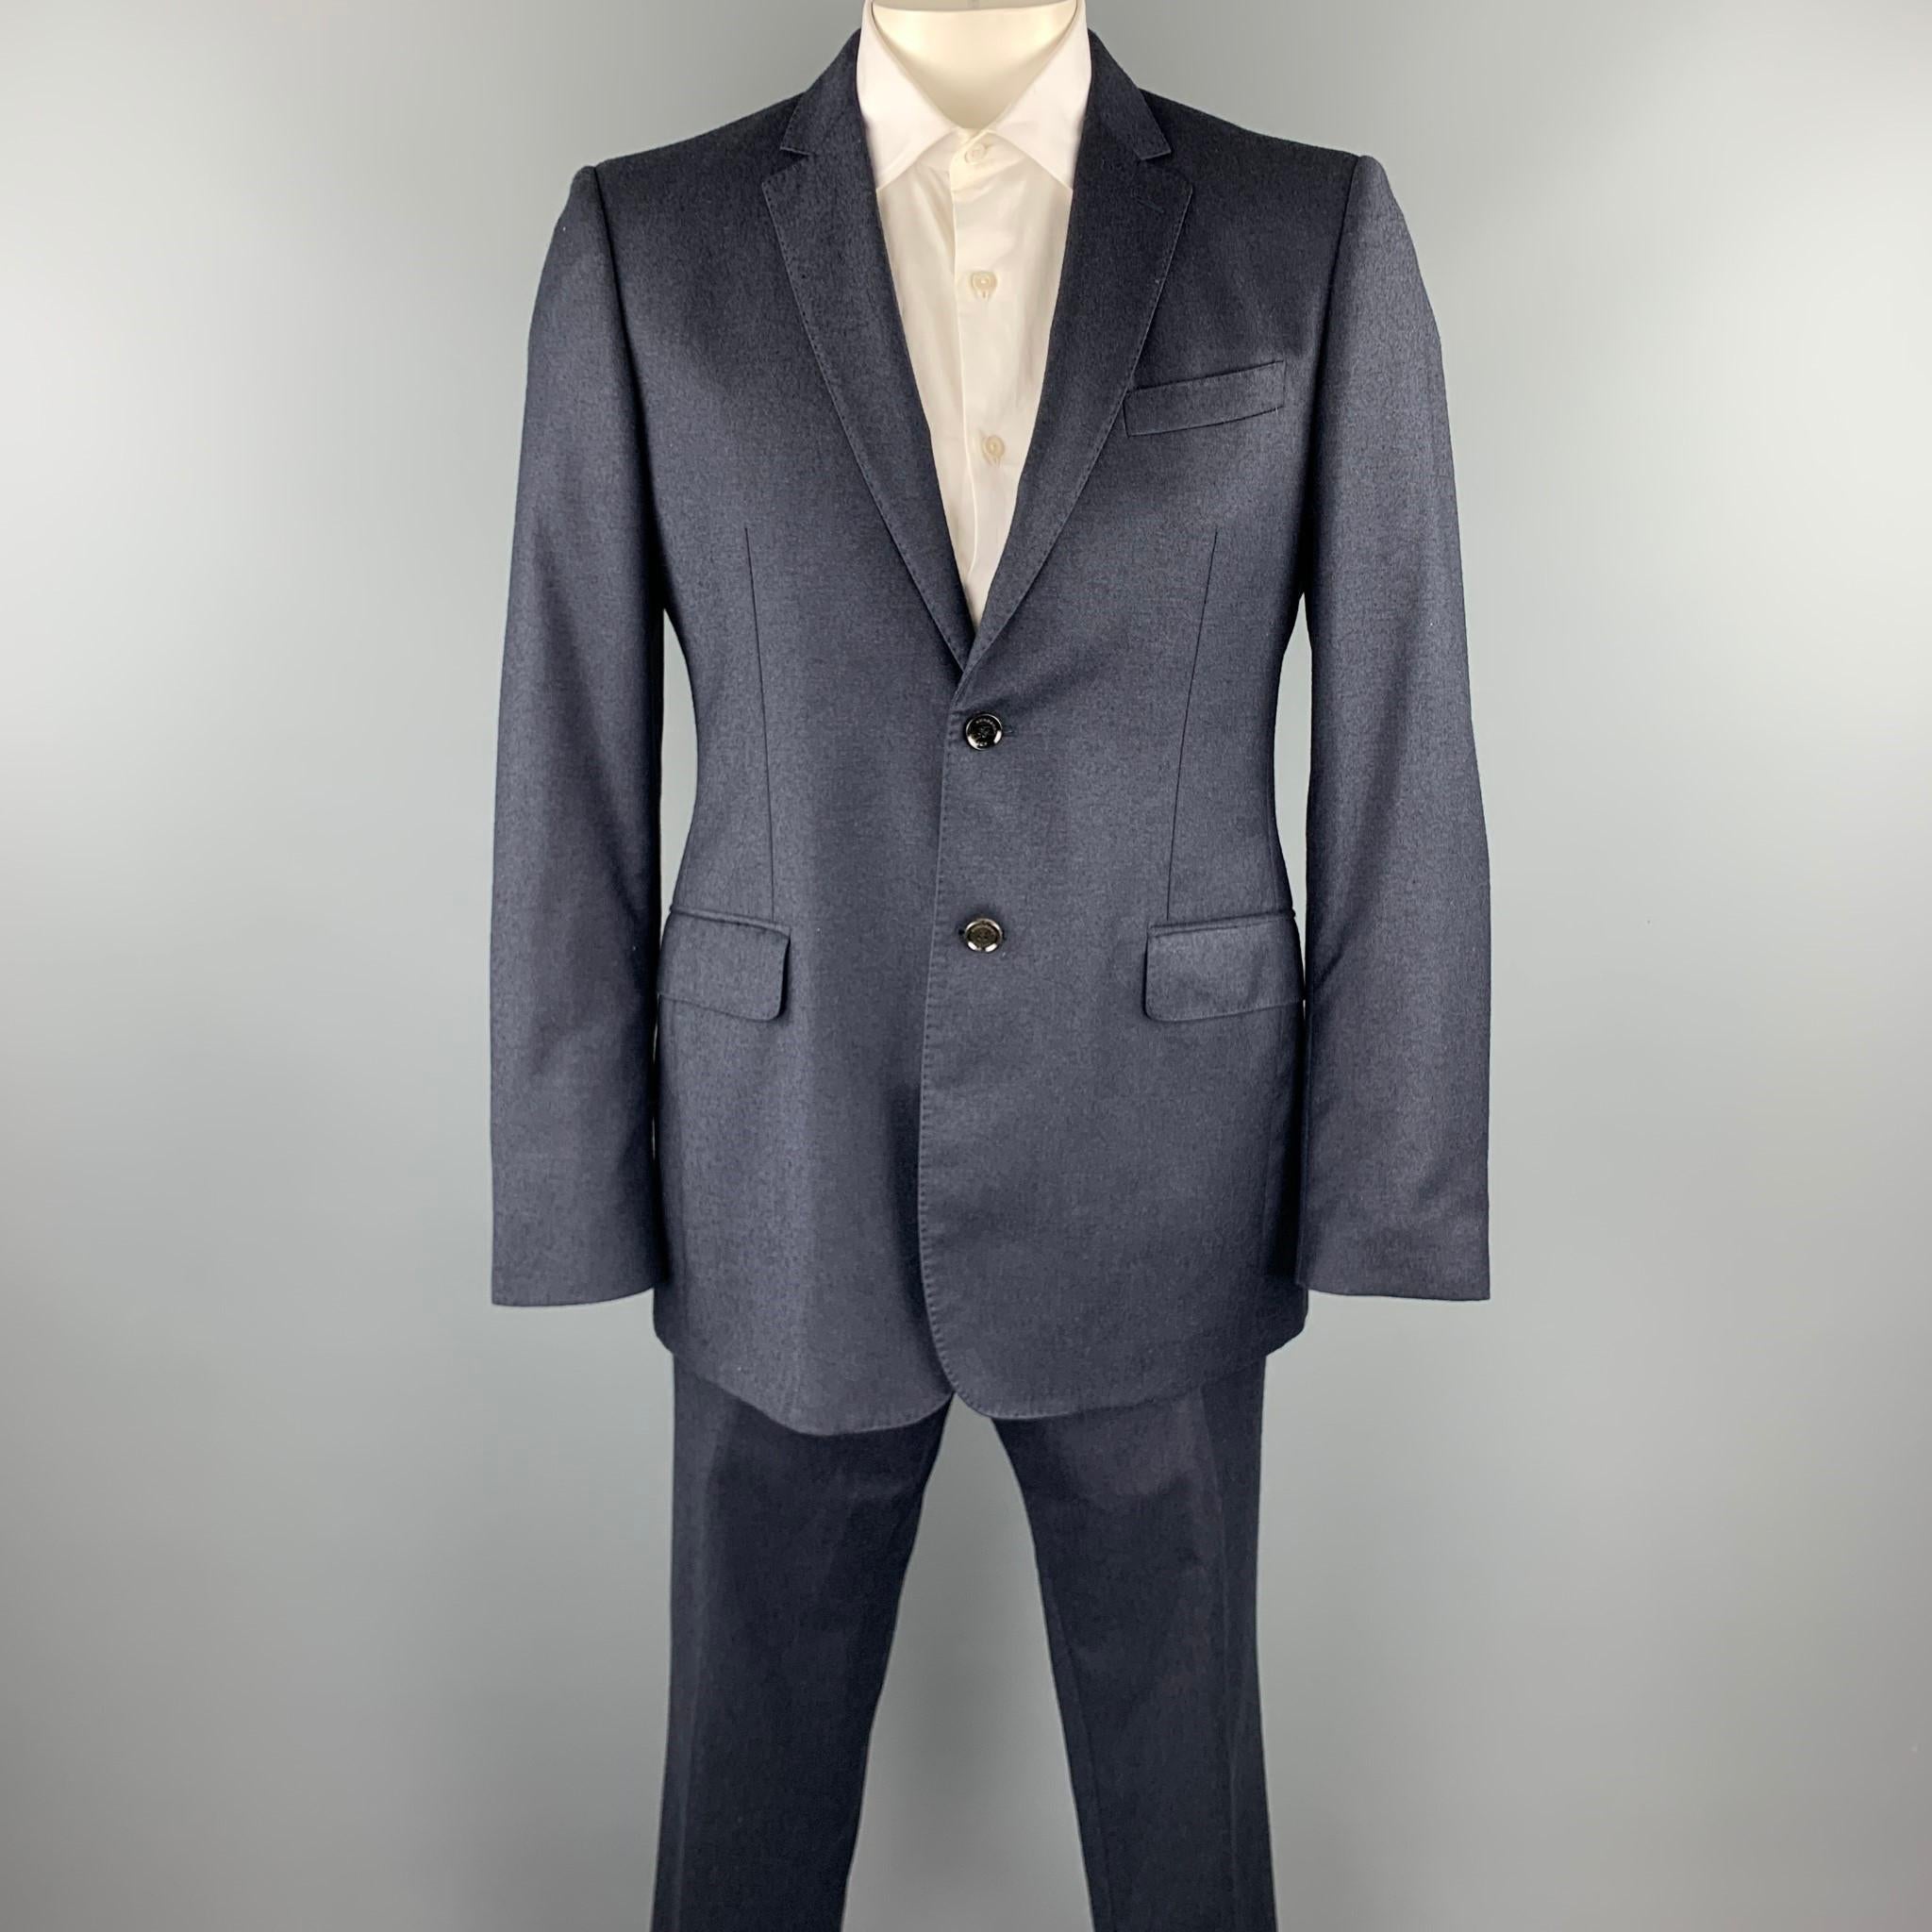 BURBERRY LONDON suit comes in a navy wool with a full monogram print liner and includes a single breasted, two button sport coat with a notch lapel and matching flat front trousers. Made in Italy.

Excellent Pre-Owned Condition.
Marked: 52